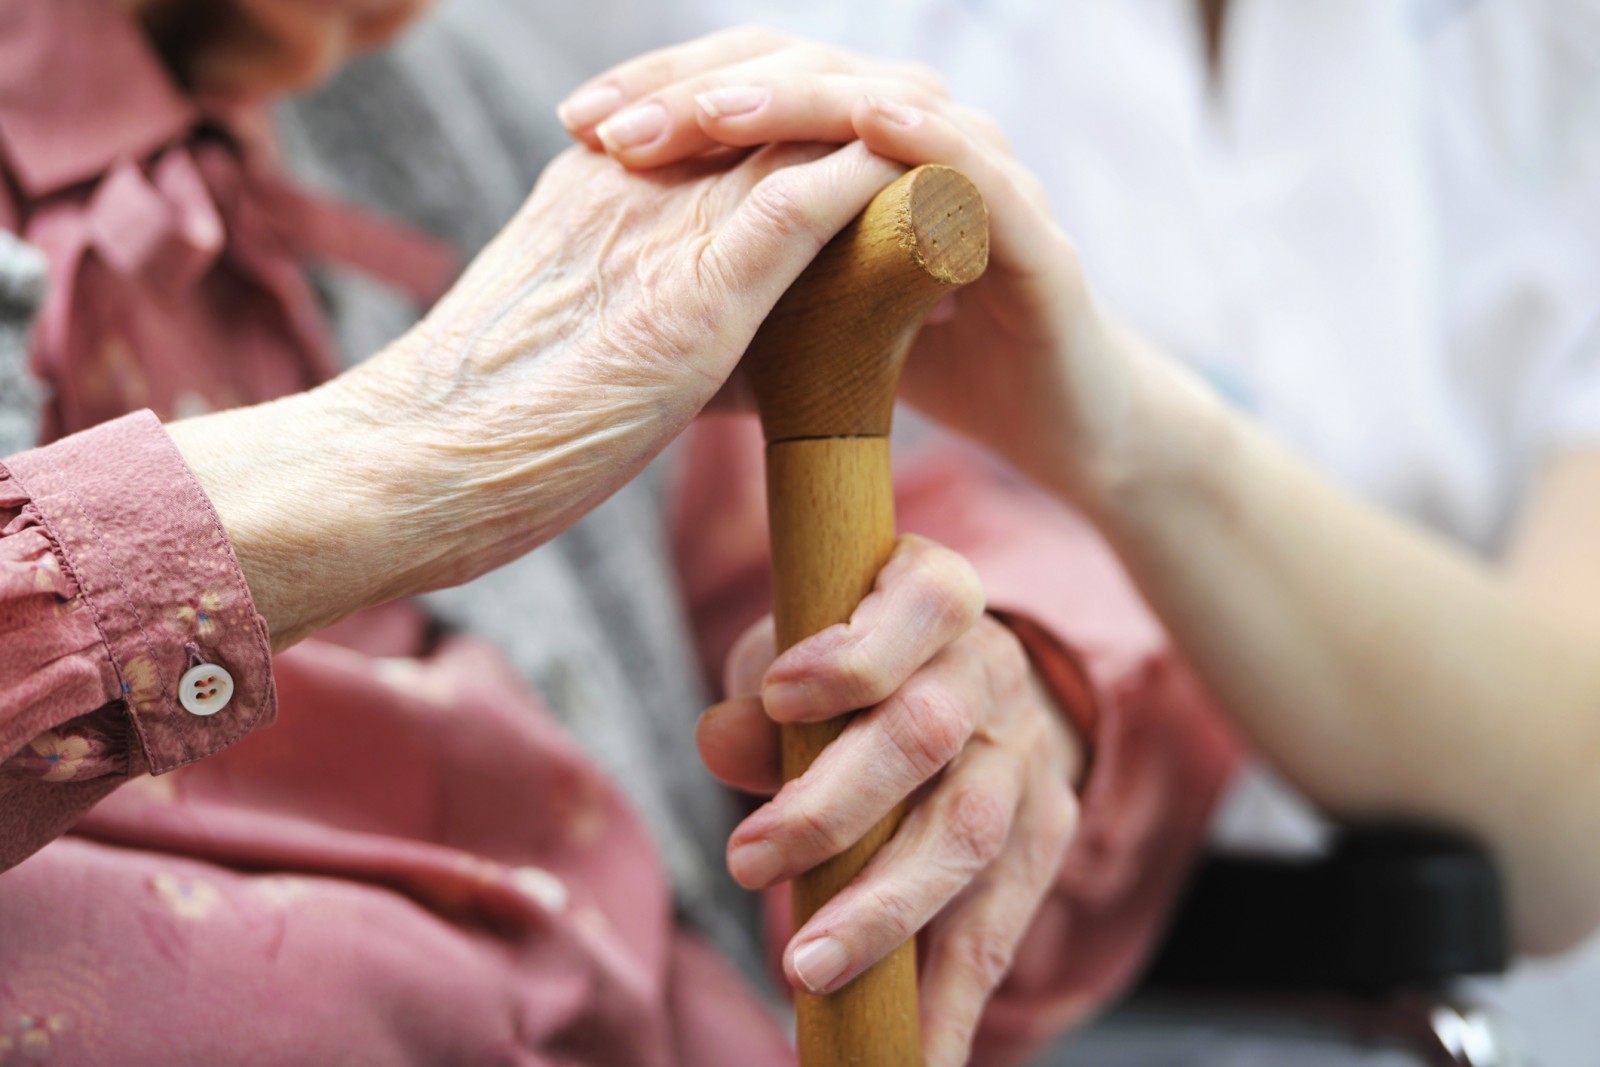 BCCPA featured in CKNW “Future of Work” report on seniors care